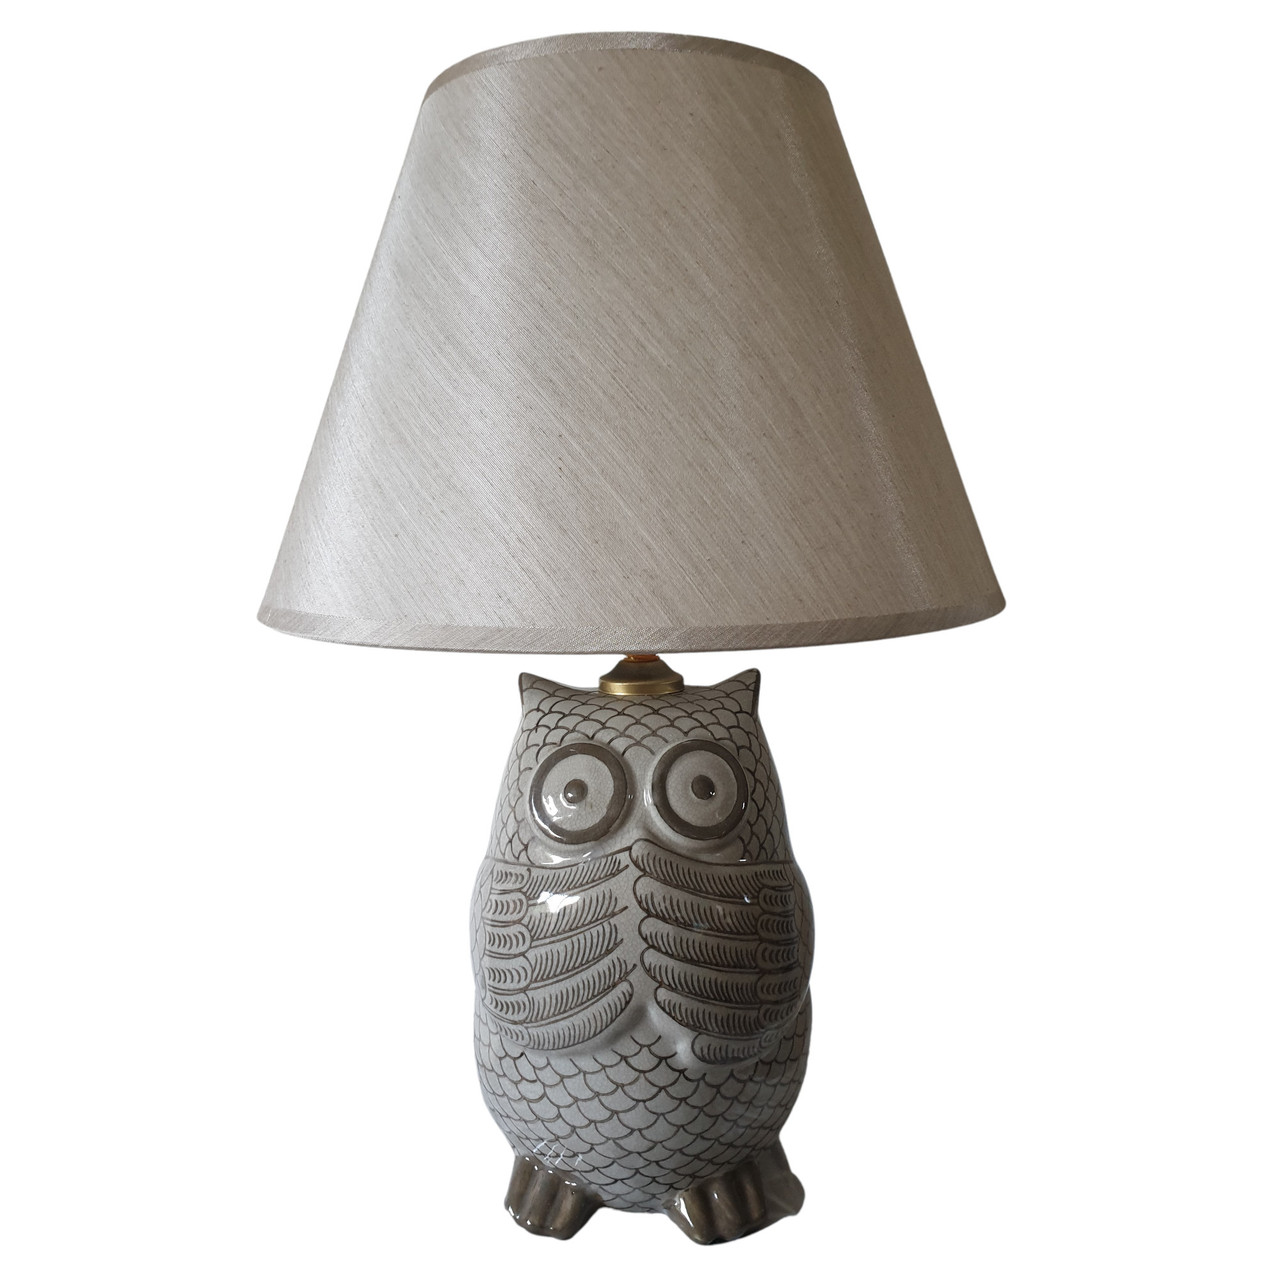 Pair of Chinese Owl Shaped Table Lamps with Golden Shades - 45cm